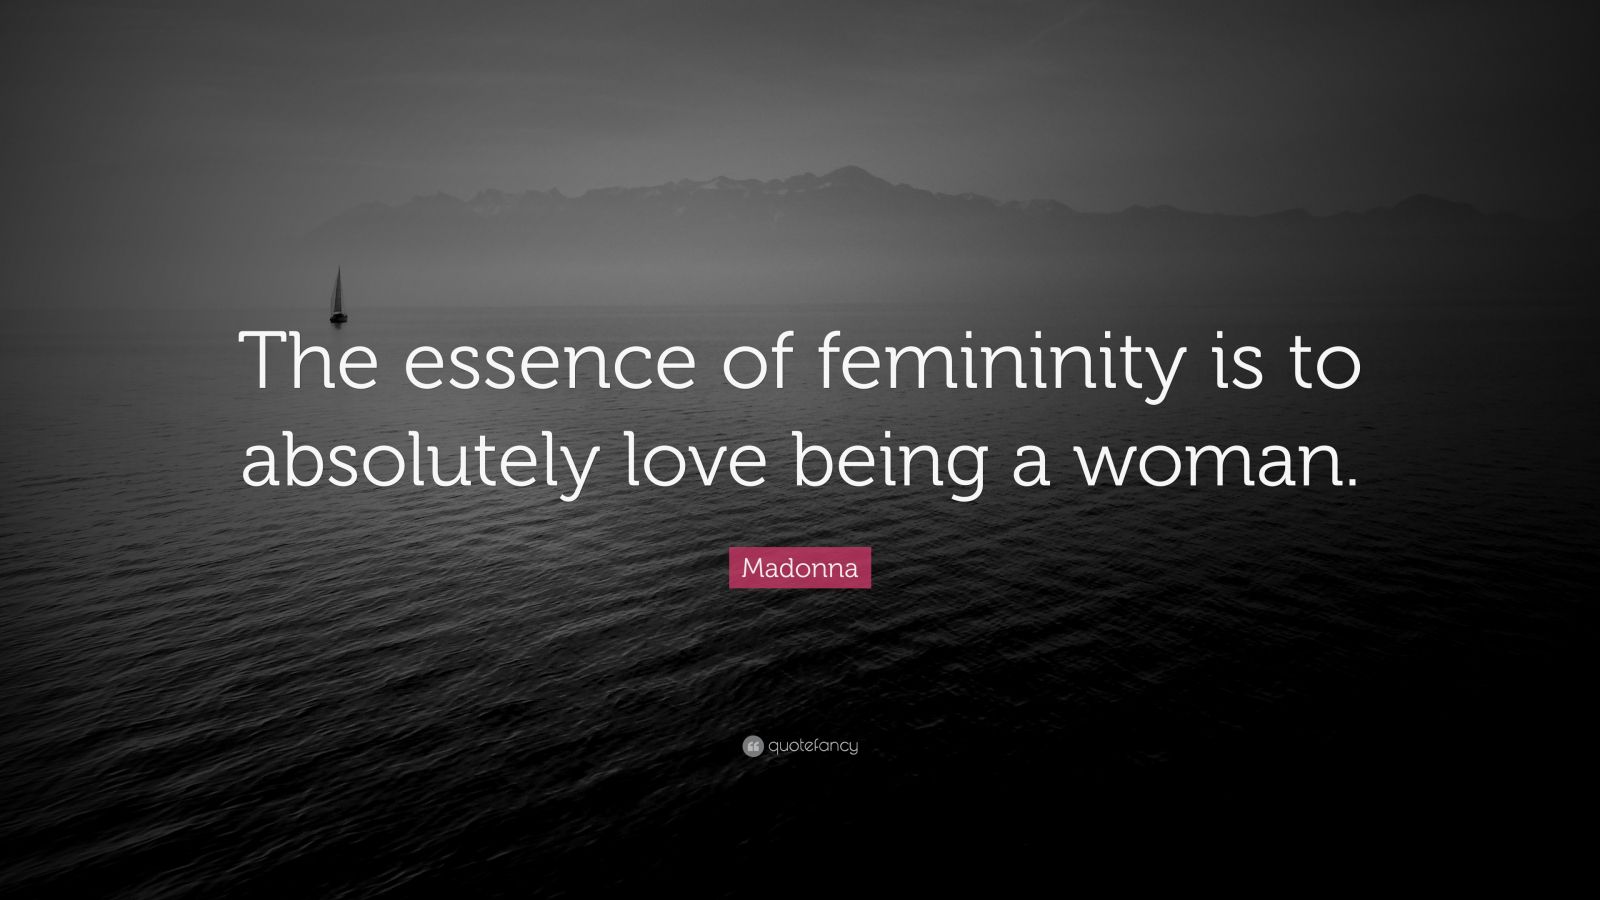 Madonna Quote: “The essence of femininity is to absolutely love being a ...